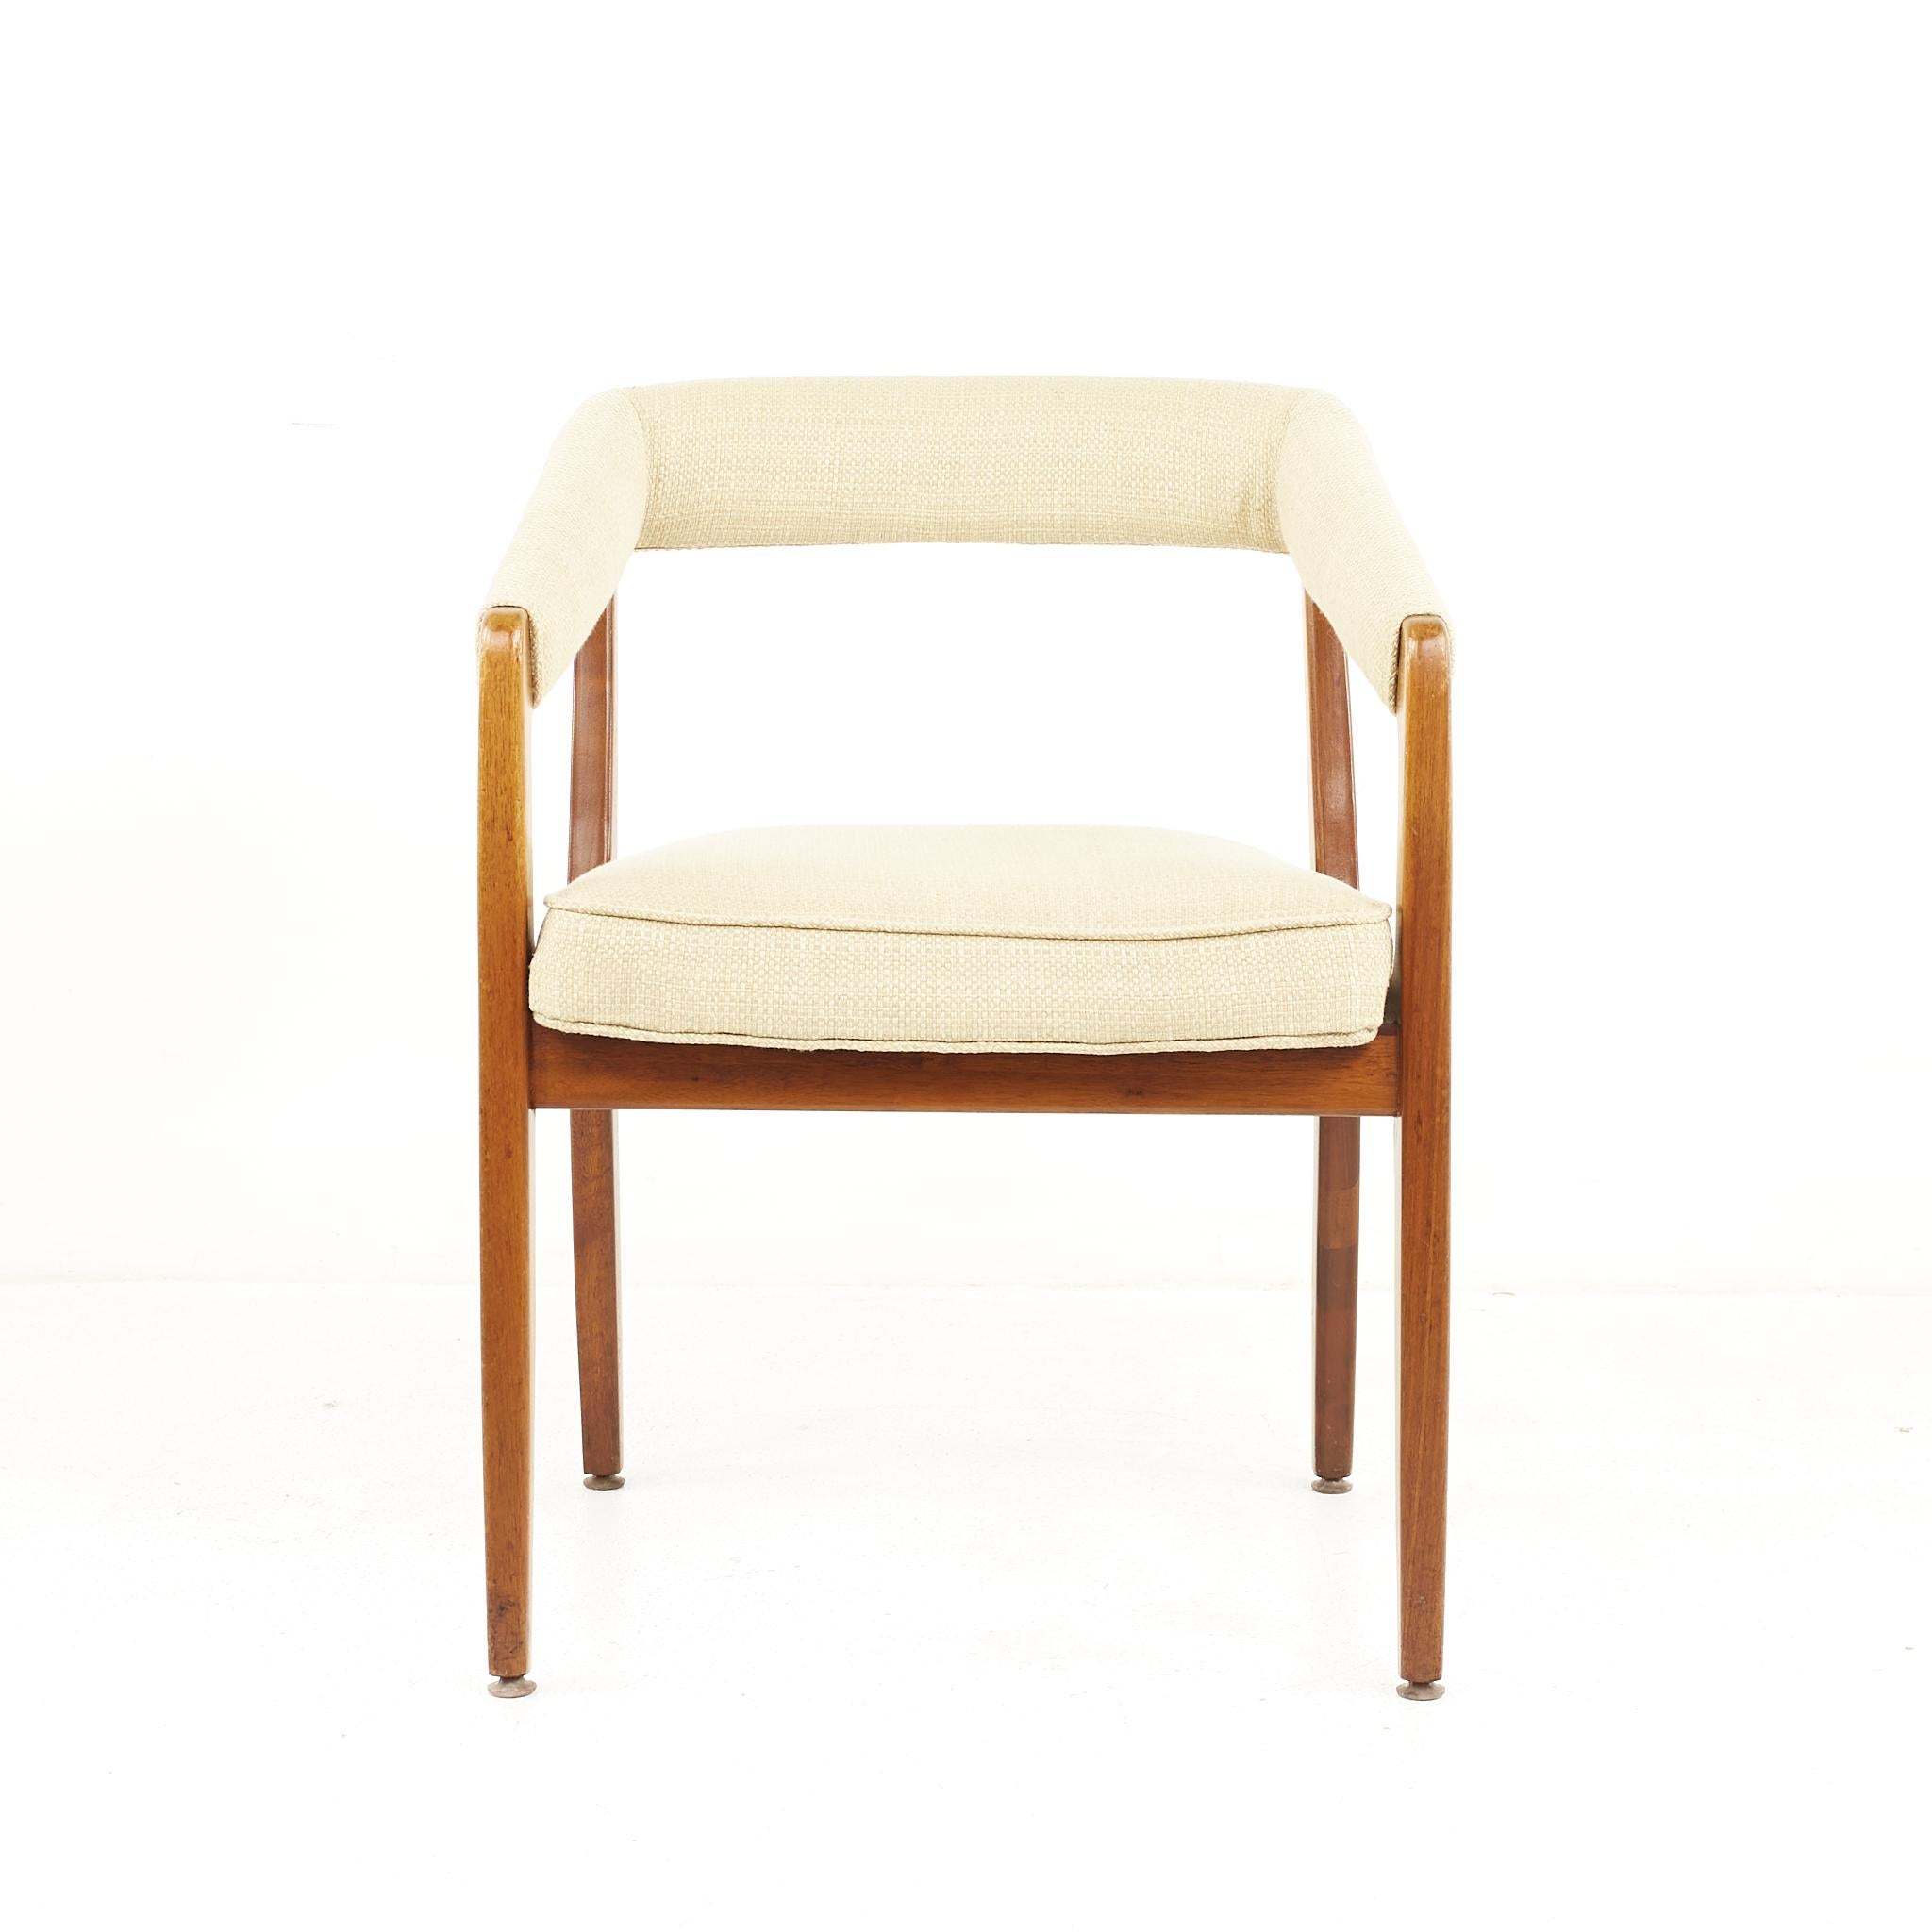 Late 20th Century Kai Kristiansen Style Mid Century Danish Teak Occasional Lounge Chairs, A Pair For Sale